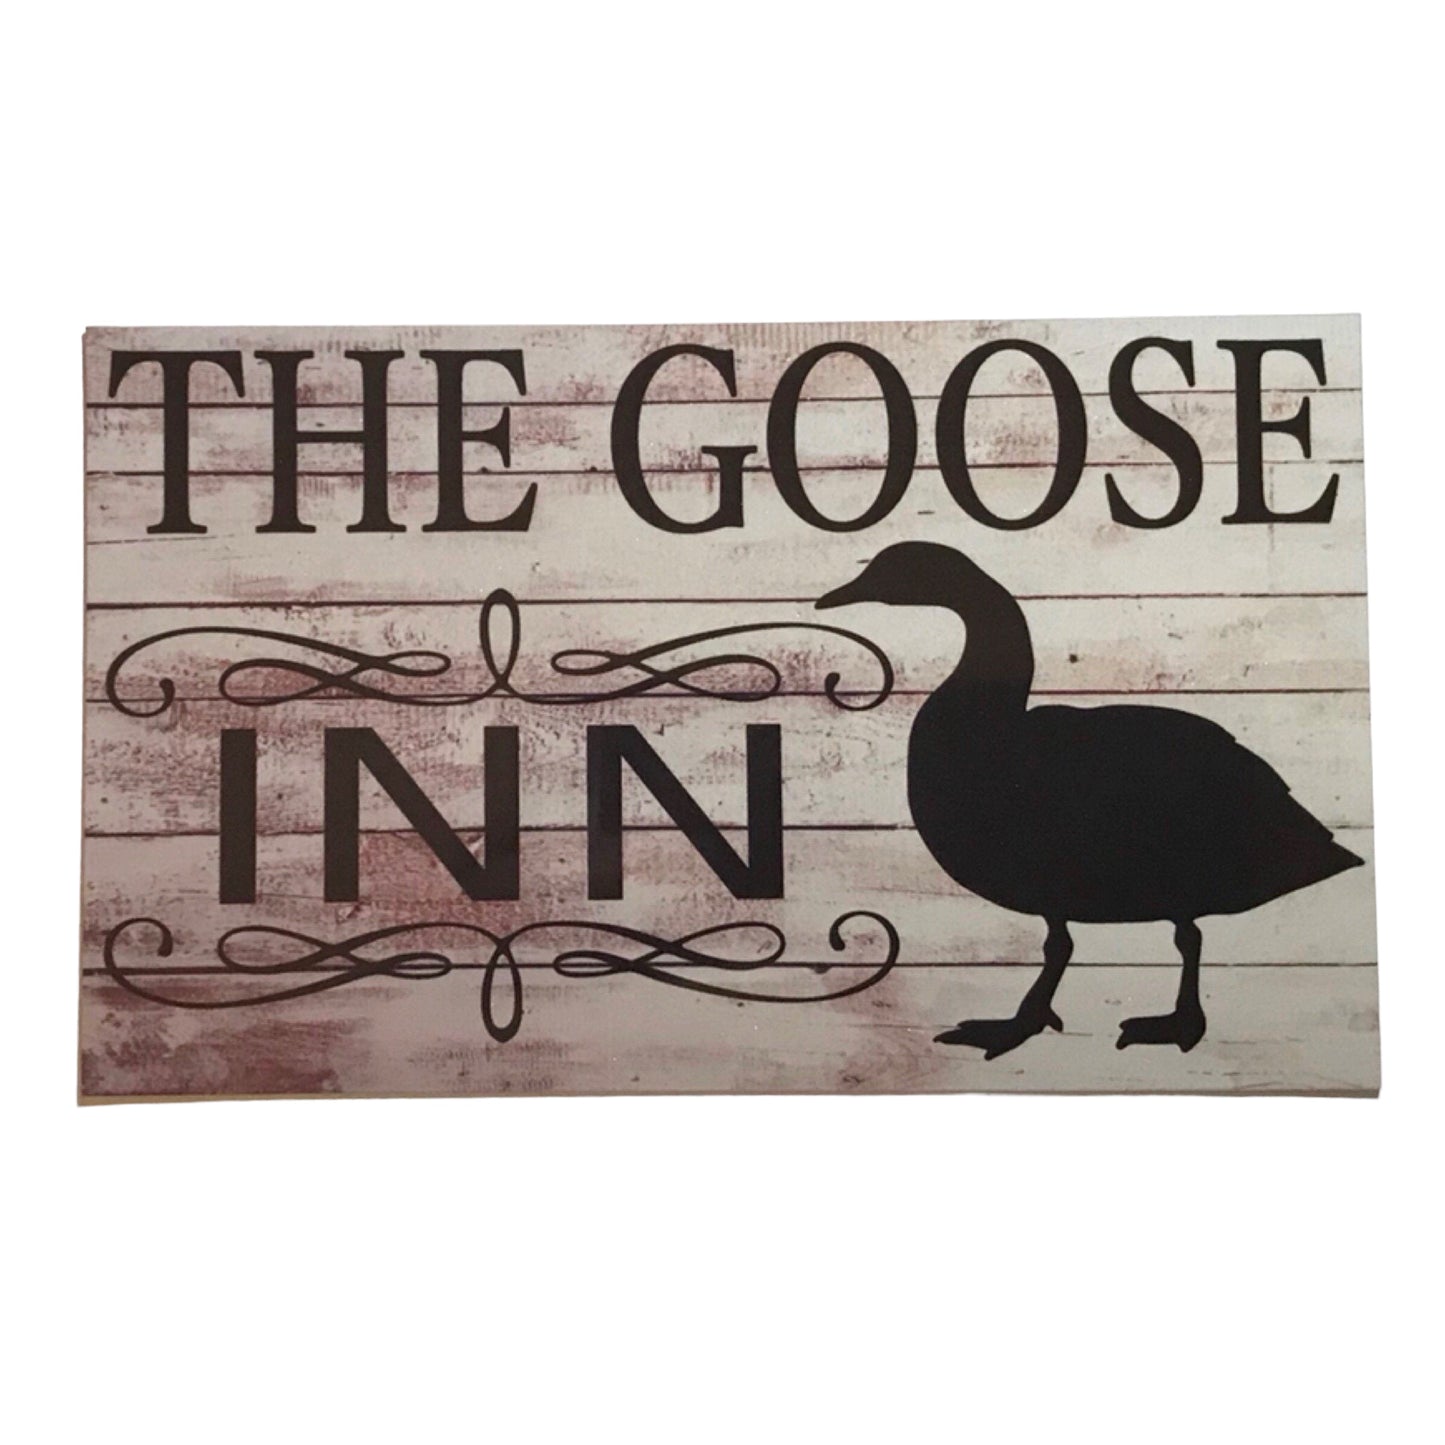 The Goose Geese Inn Sign - The Renmy Store Homewares & Gifts 